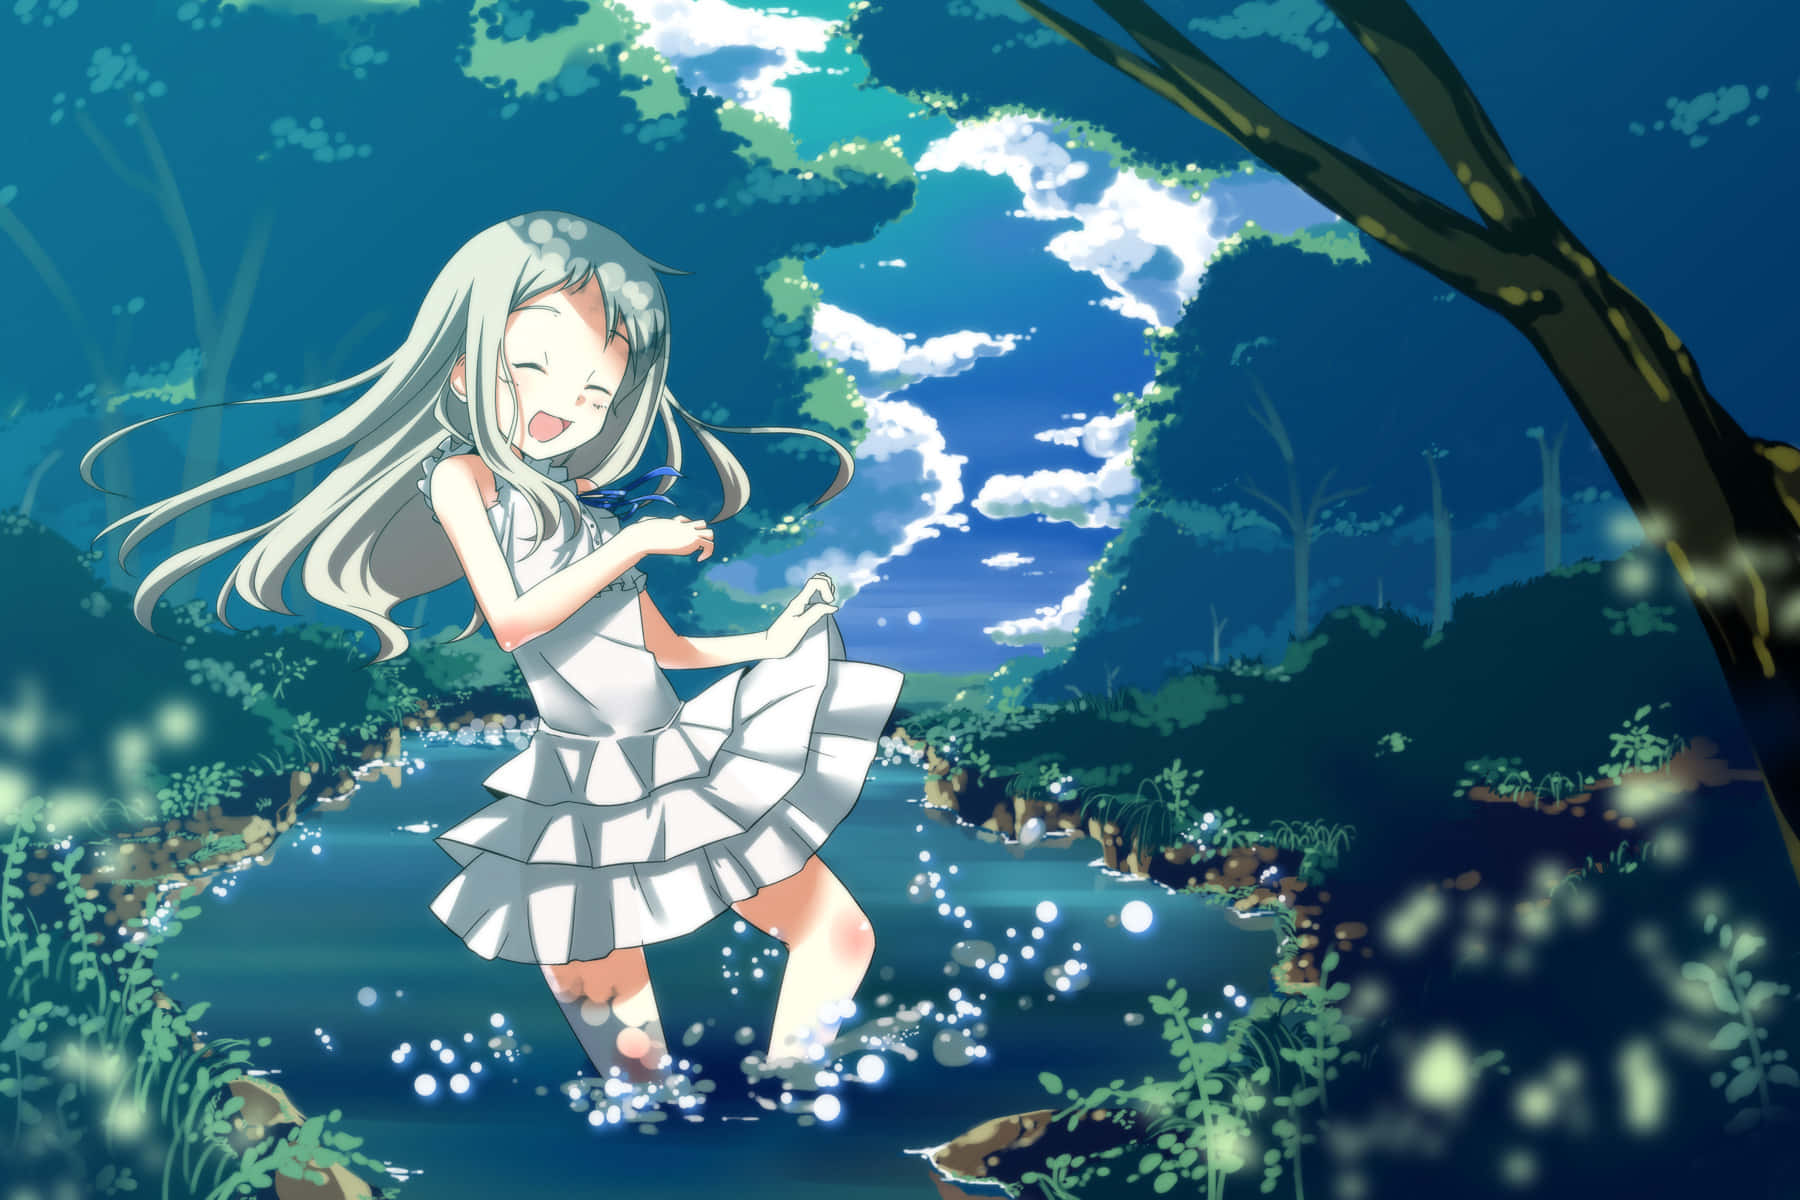 Jintan and his friends embark on an unforgettable journey of self-discovery | Anohana